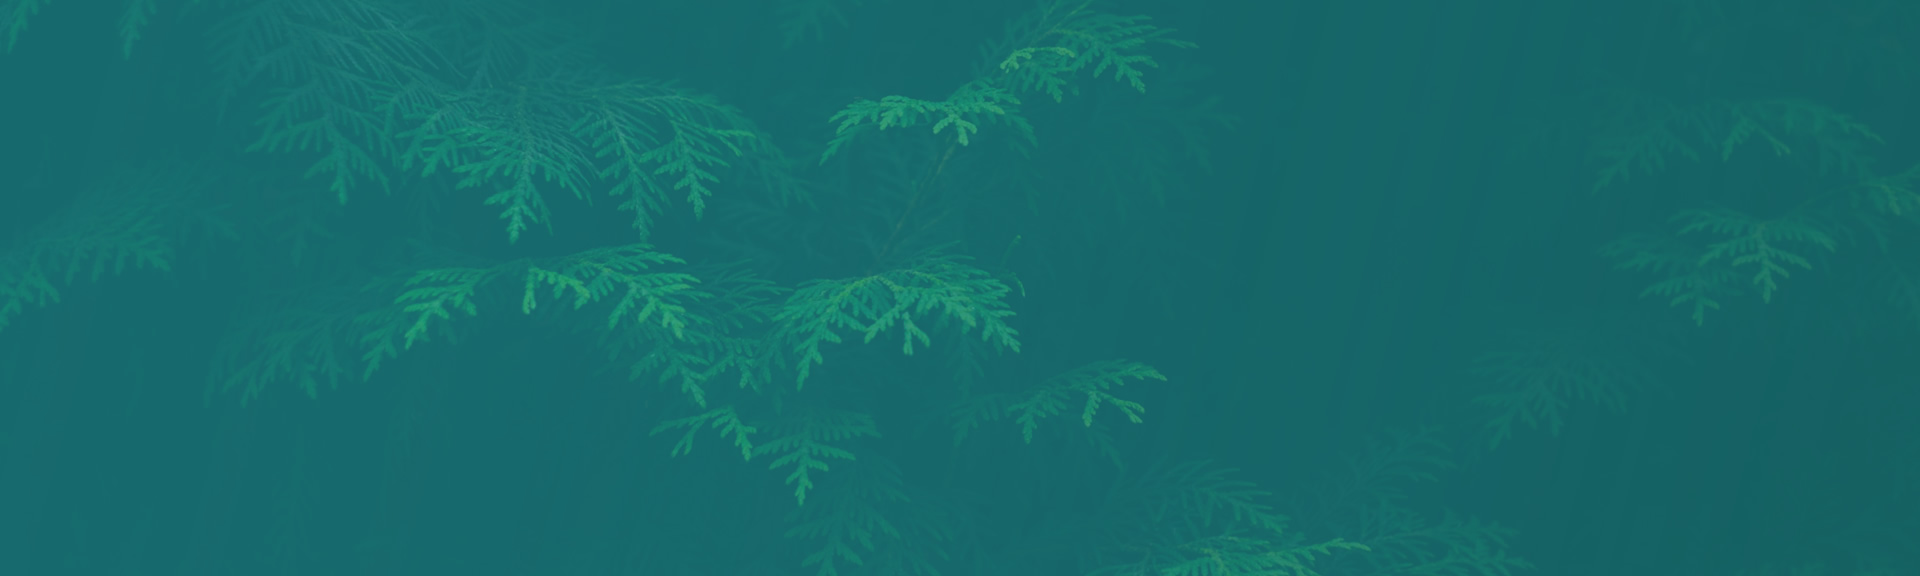 Pay Per Click Advertising Services - Cedar Branches - Background Image | Digital C4